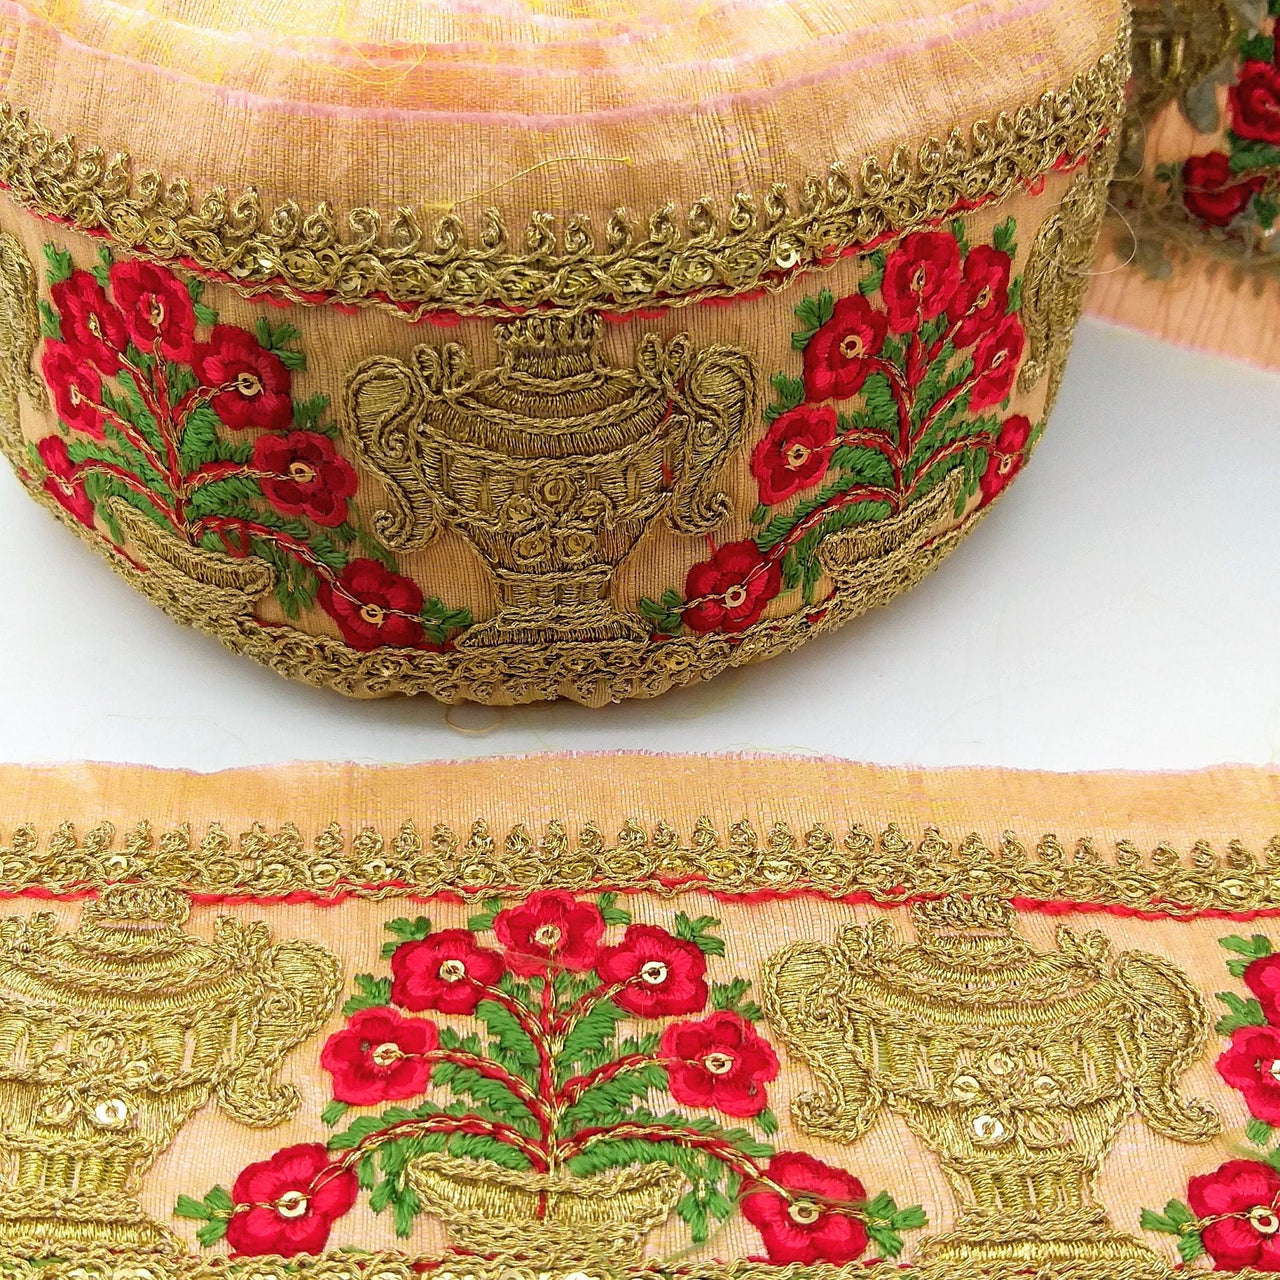 Peach Silk Trim With Floral Embroidery in Red, Green & Antique Gold, Indian Sari Border Trim By Yard Decorative Trim Craft Lace